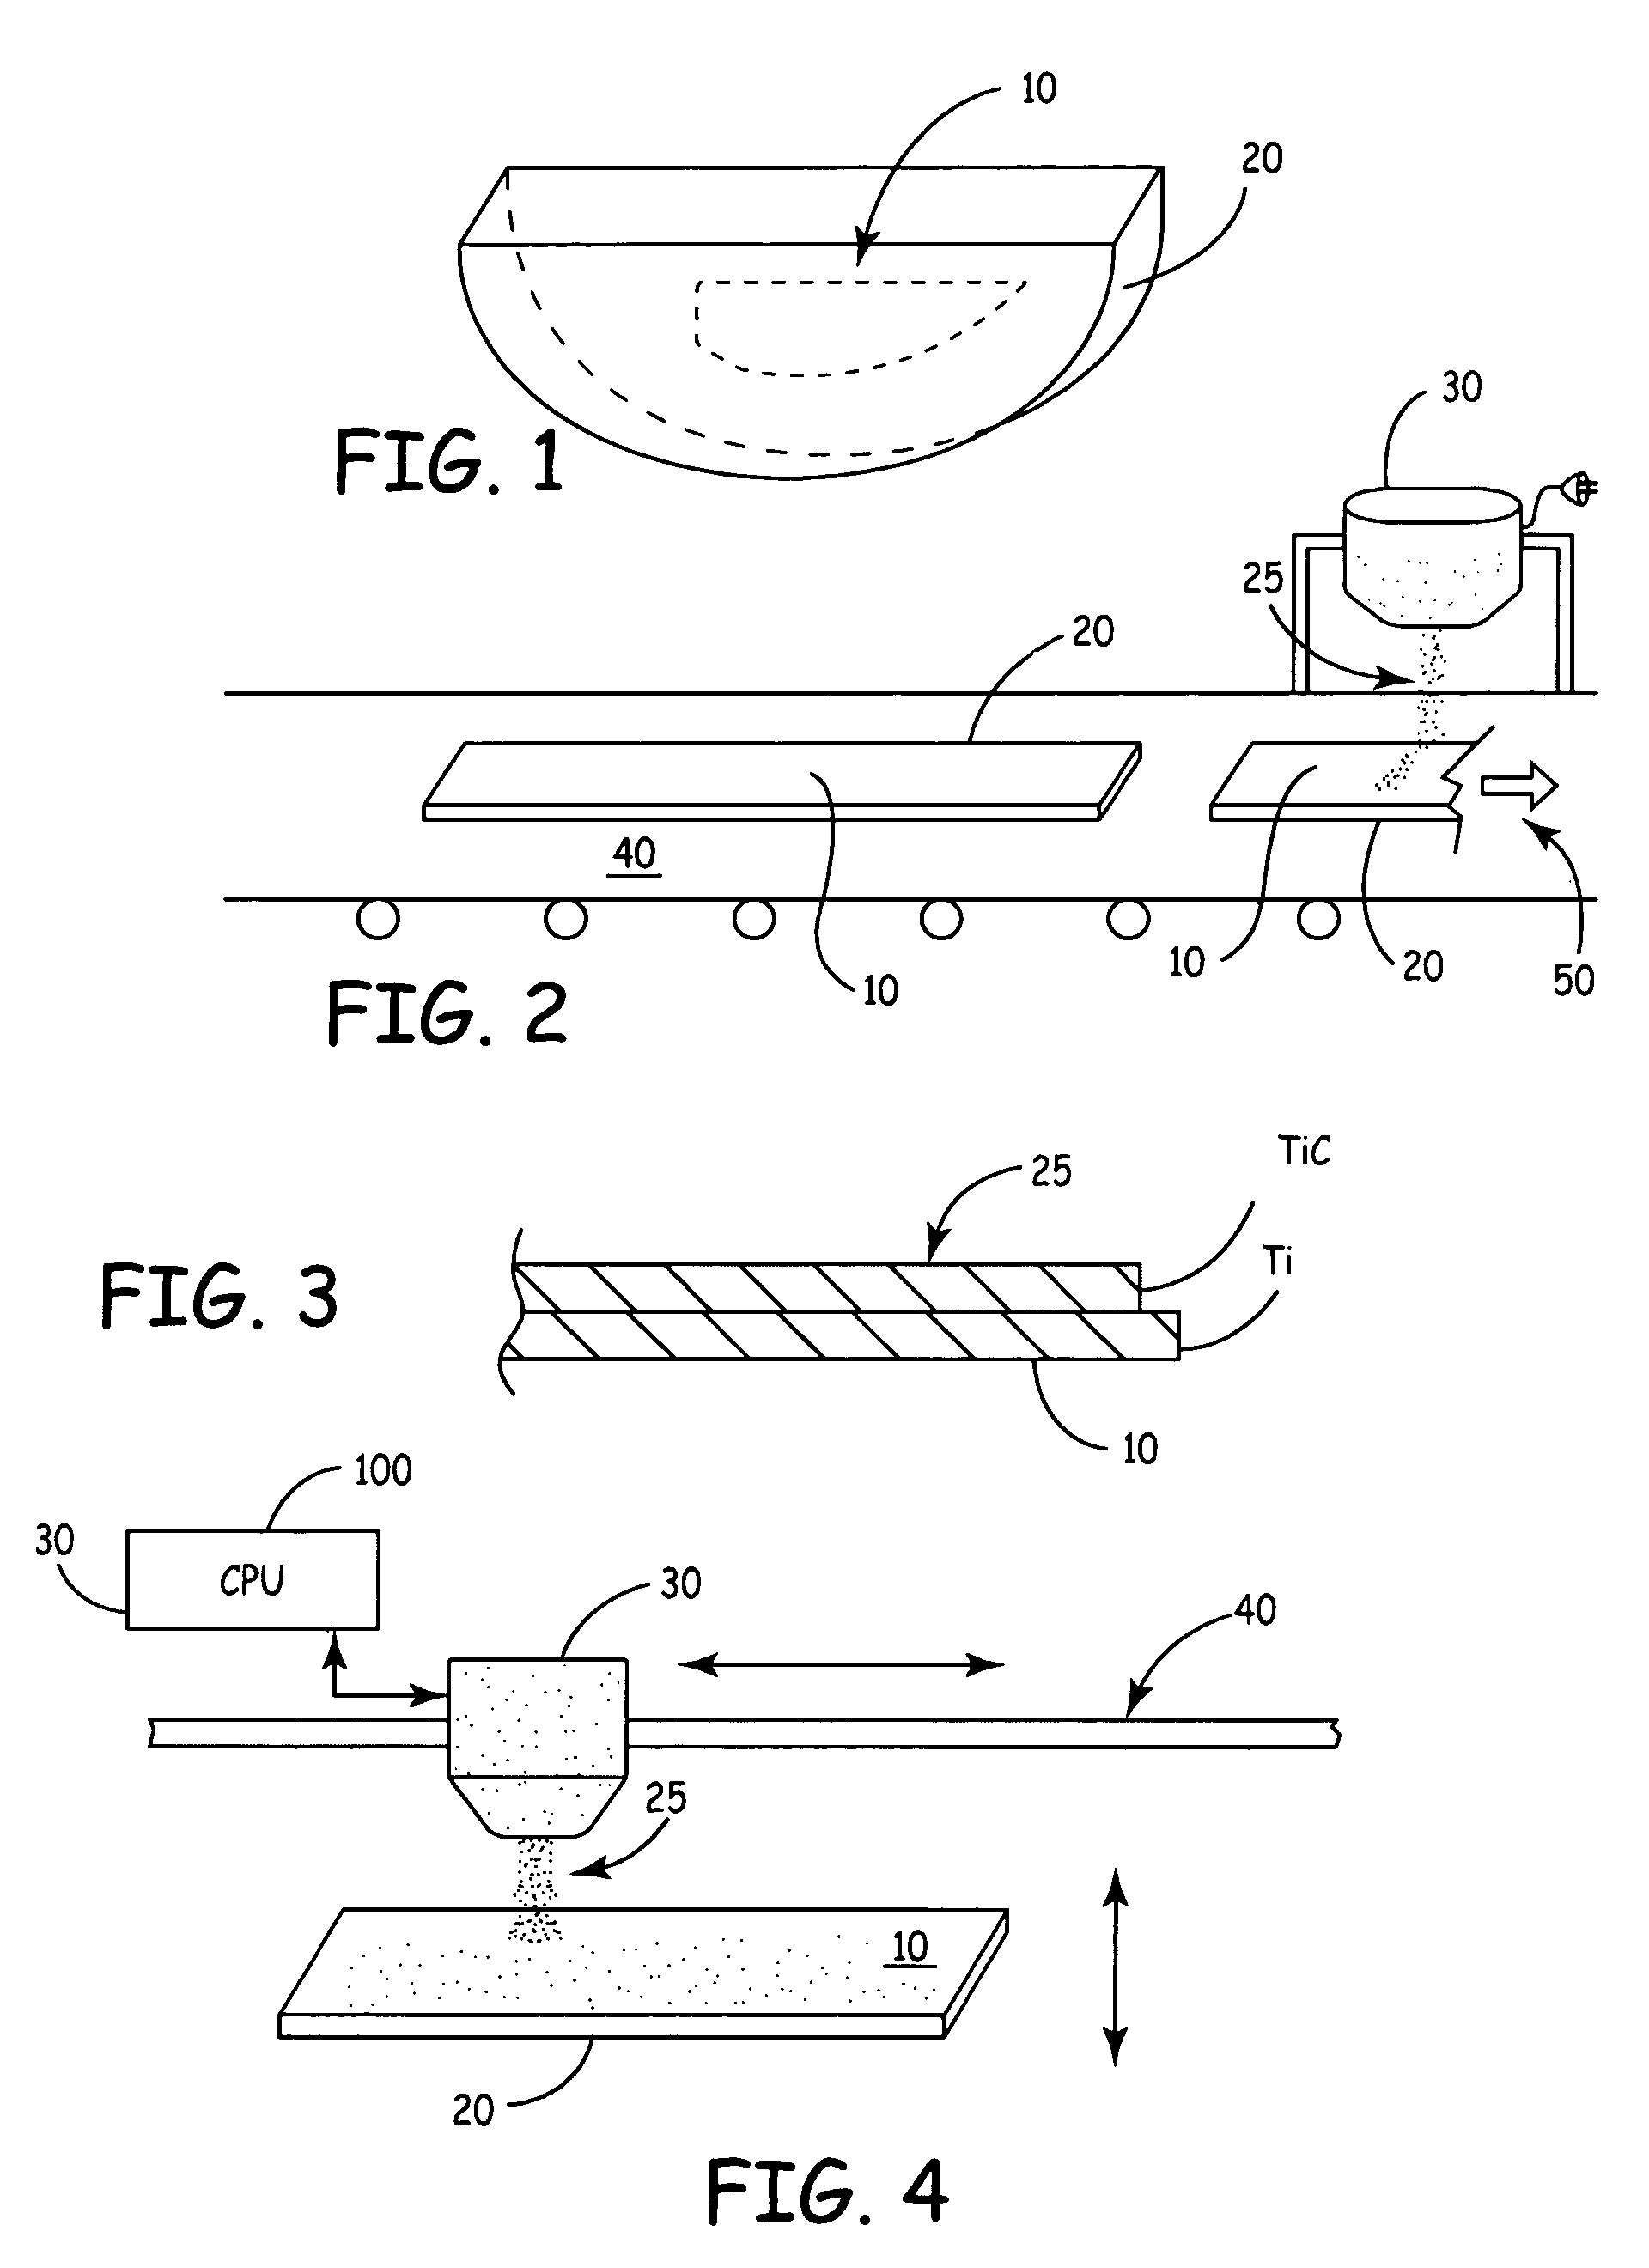 High capacitance electrode and methods of producing same